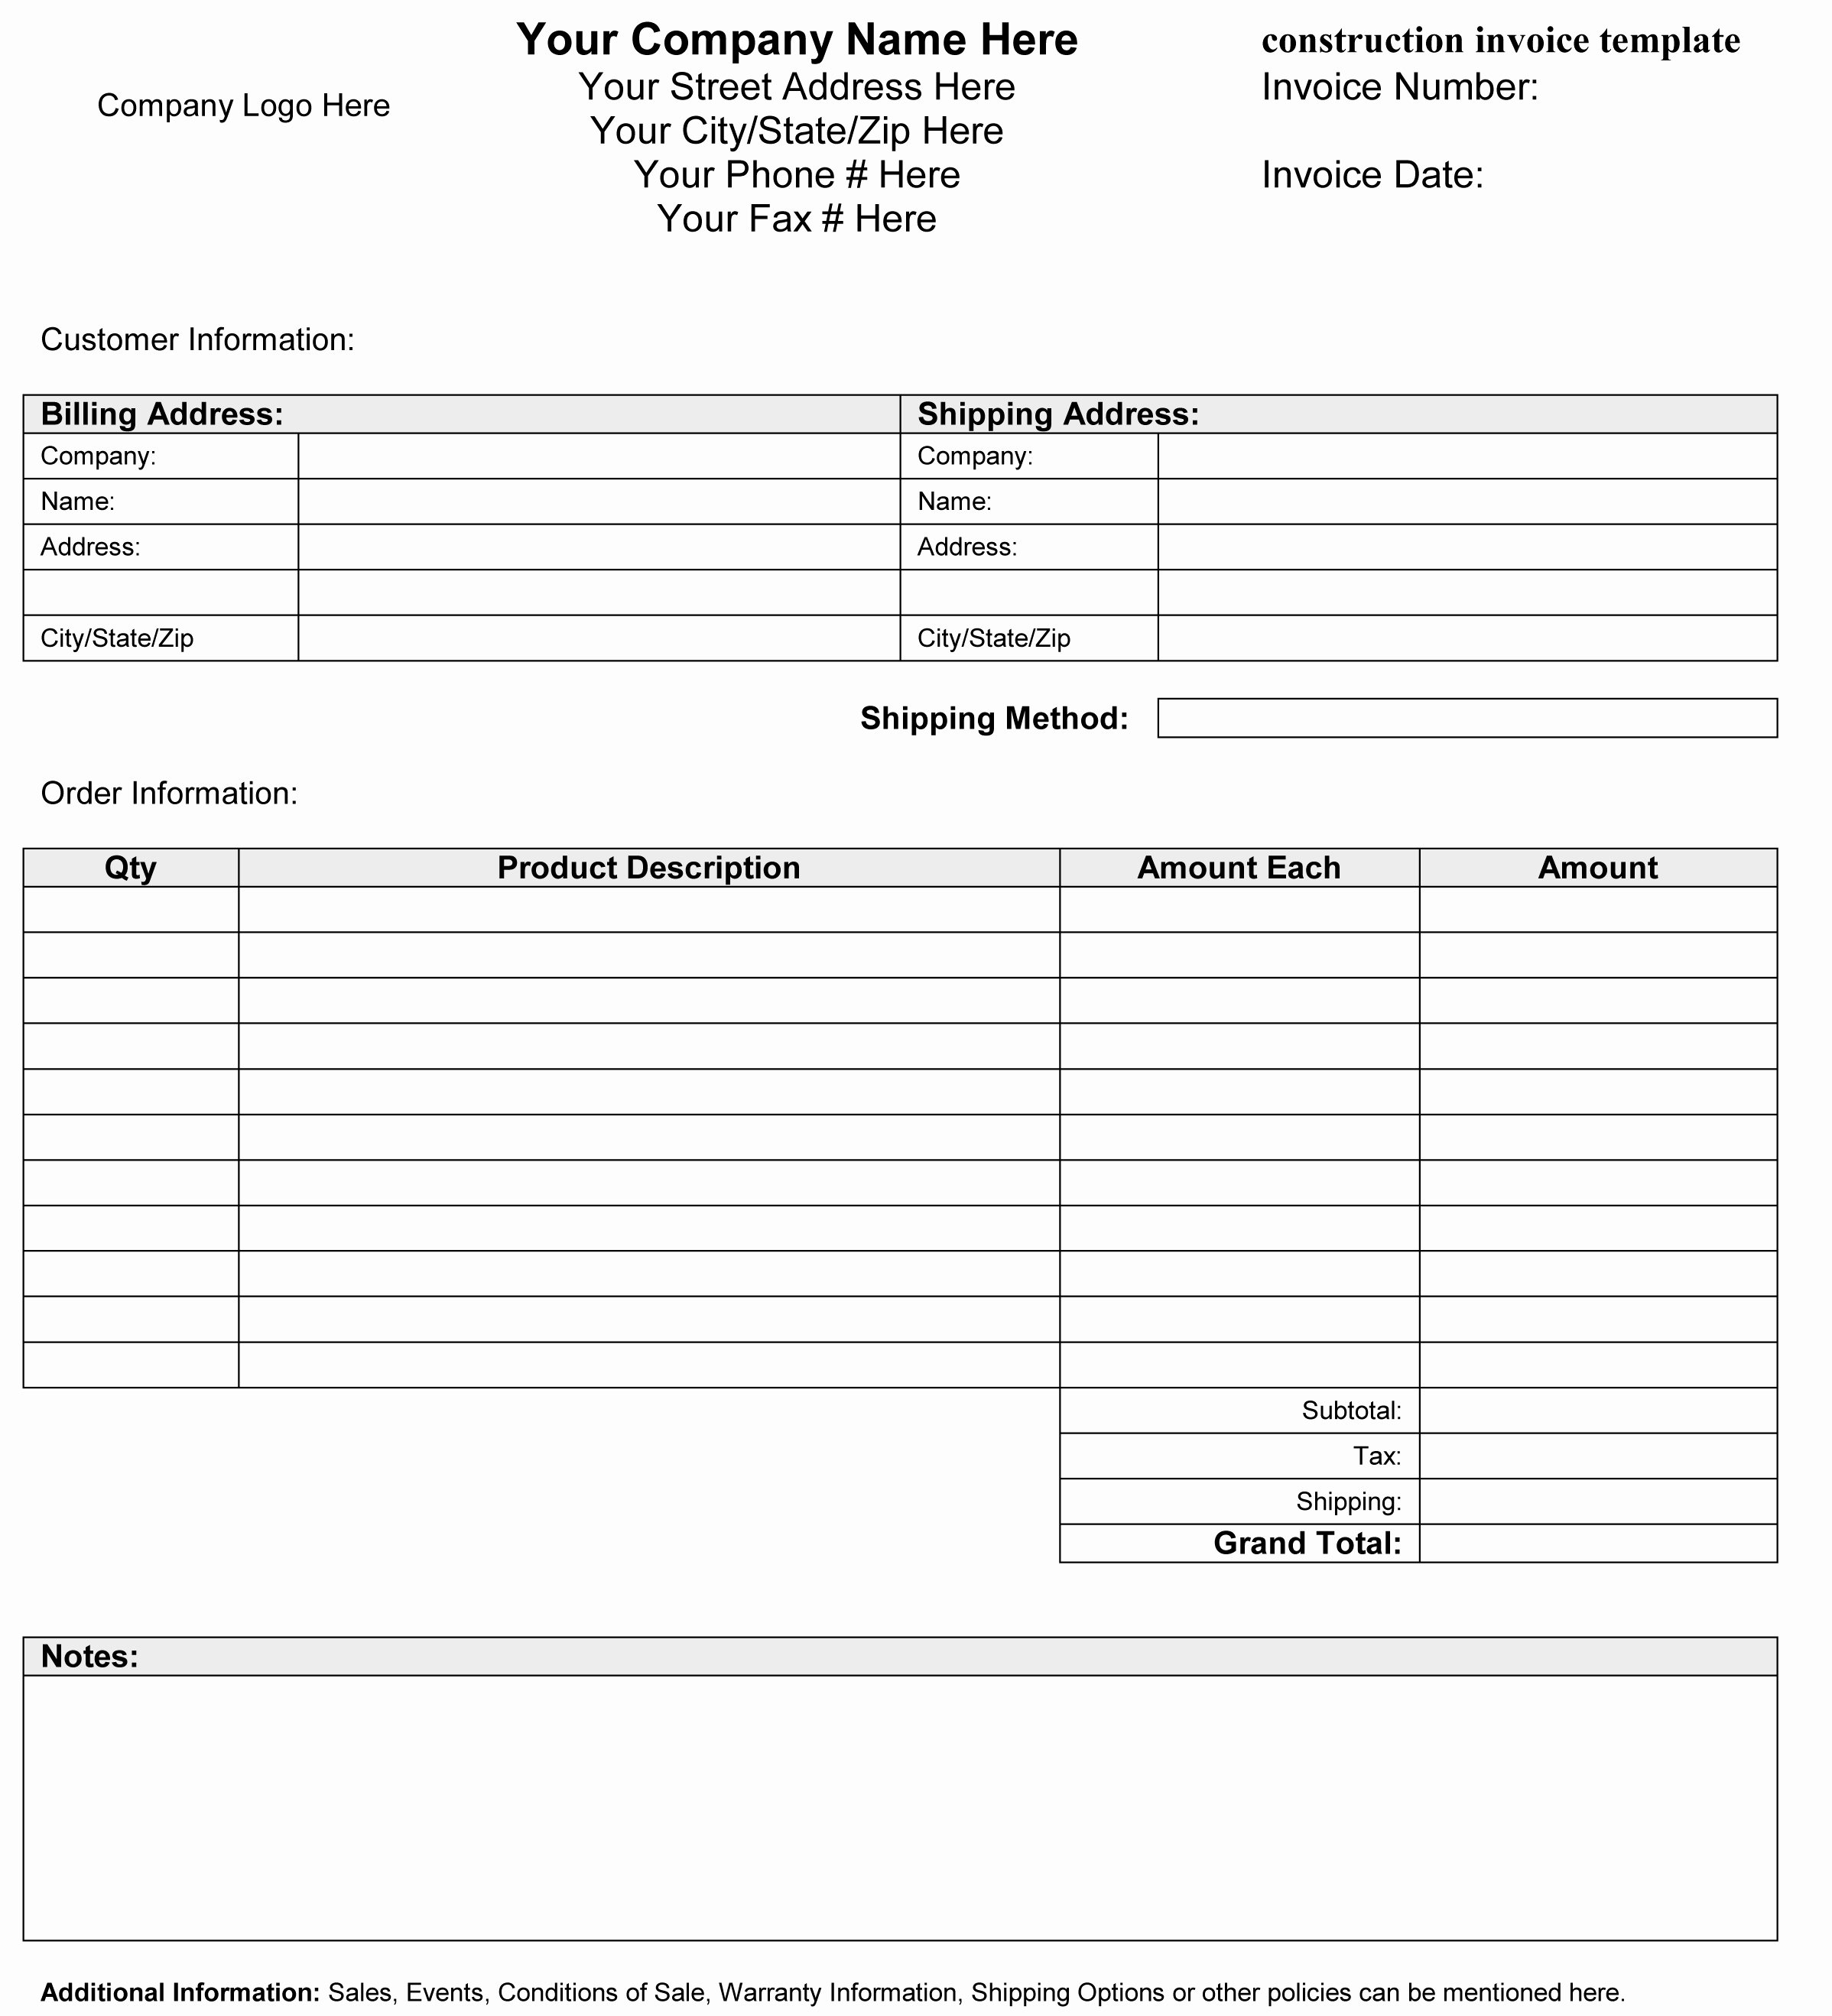 General Contractor Invoice Template Beautiful Groups Actor 4ed3653c666d Best form Template Download